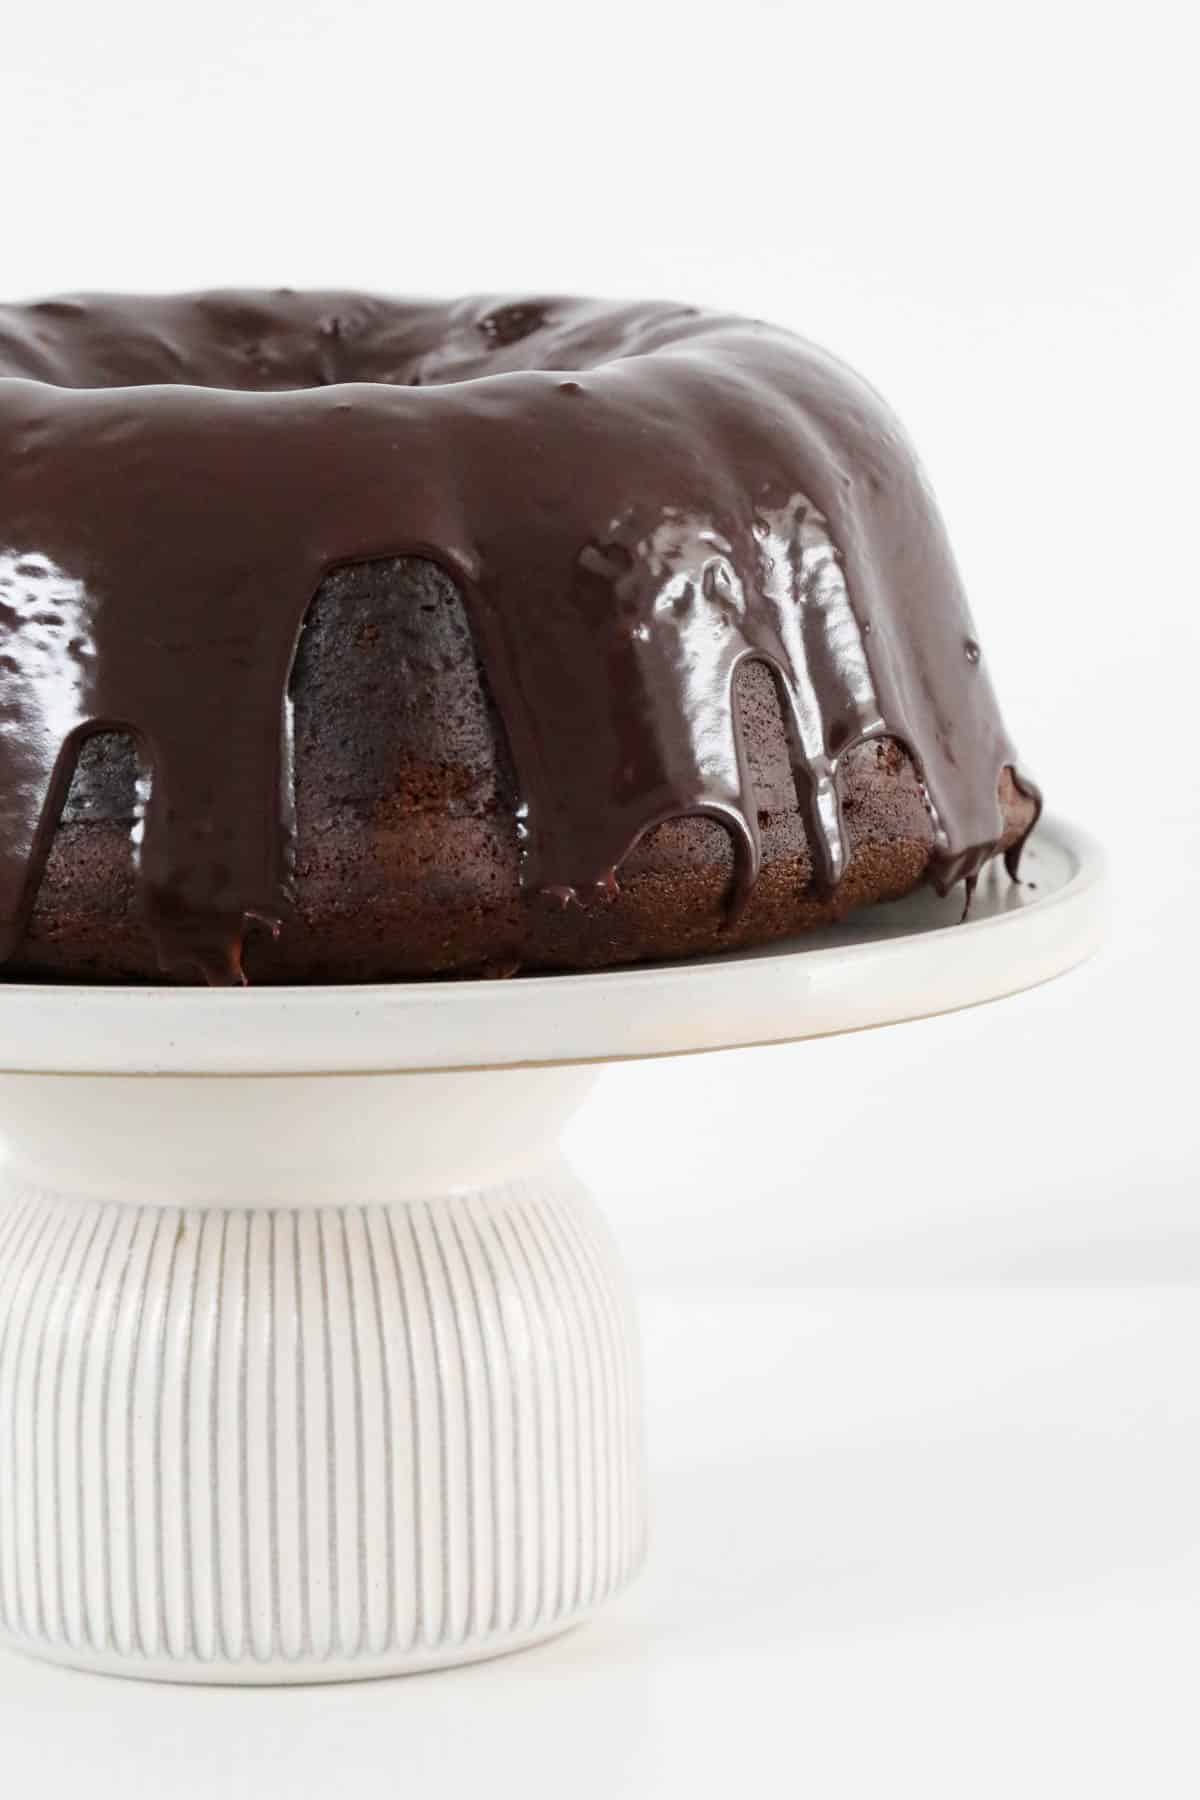 chocolate sour cream pound cake on a cake stand with chocolate ganache drizzled over the top.